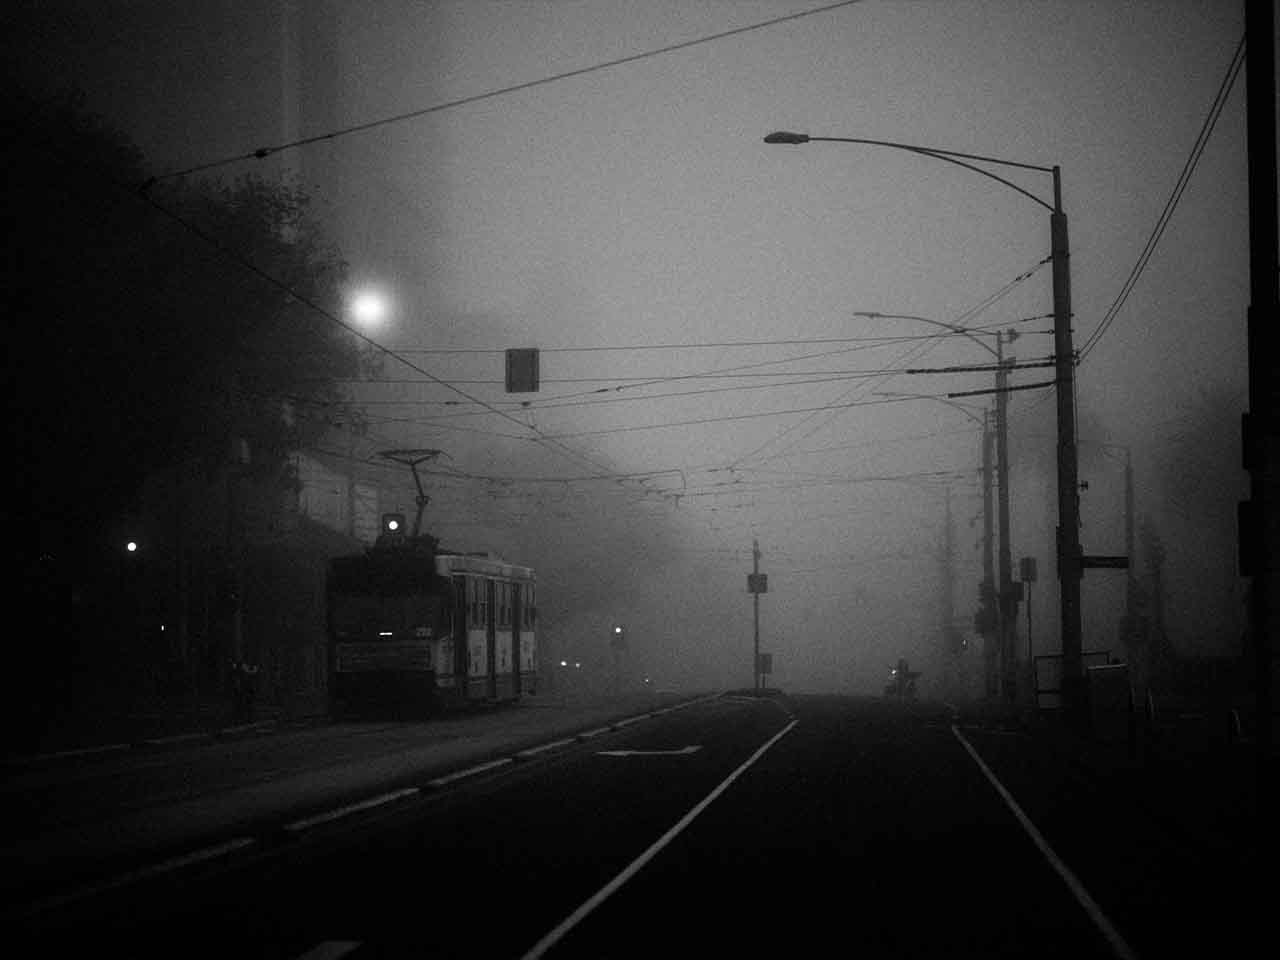 A foggy Melbourne street with a tram